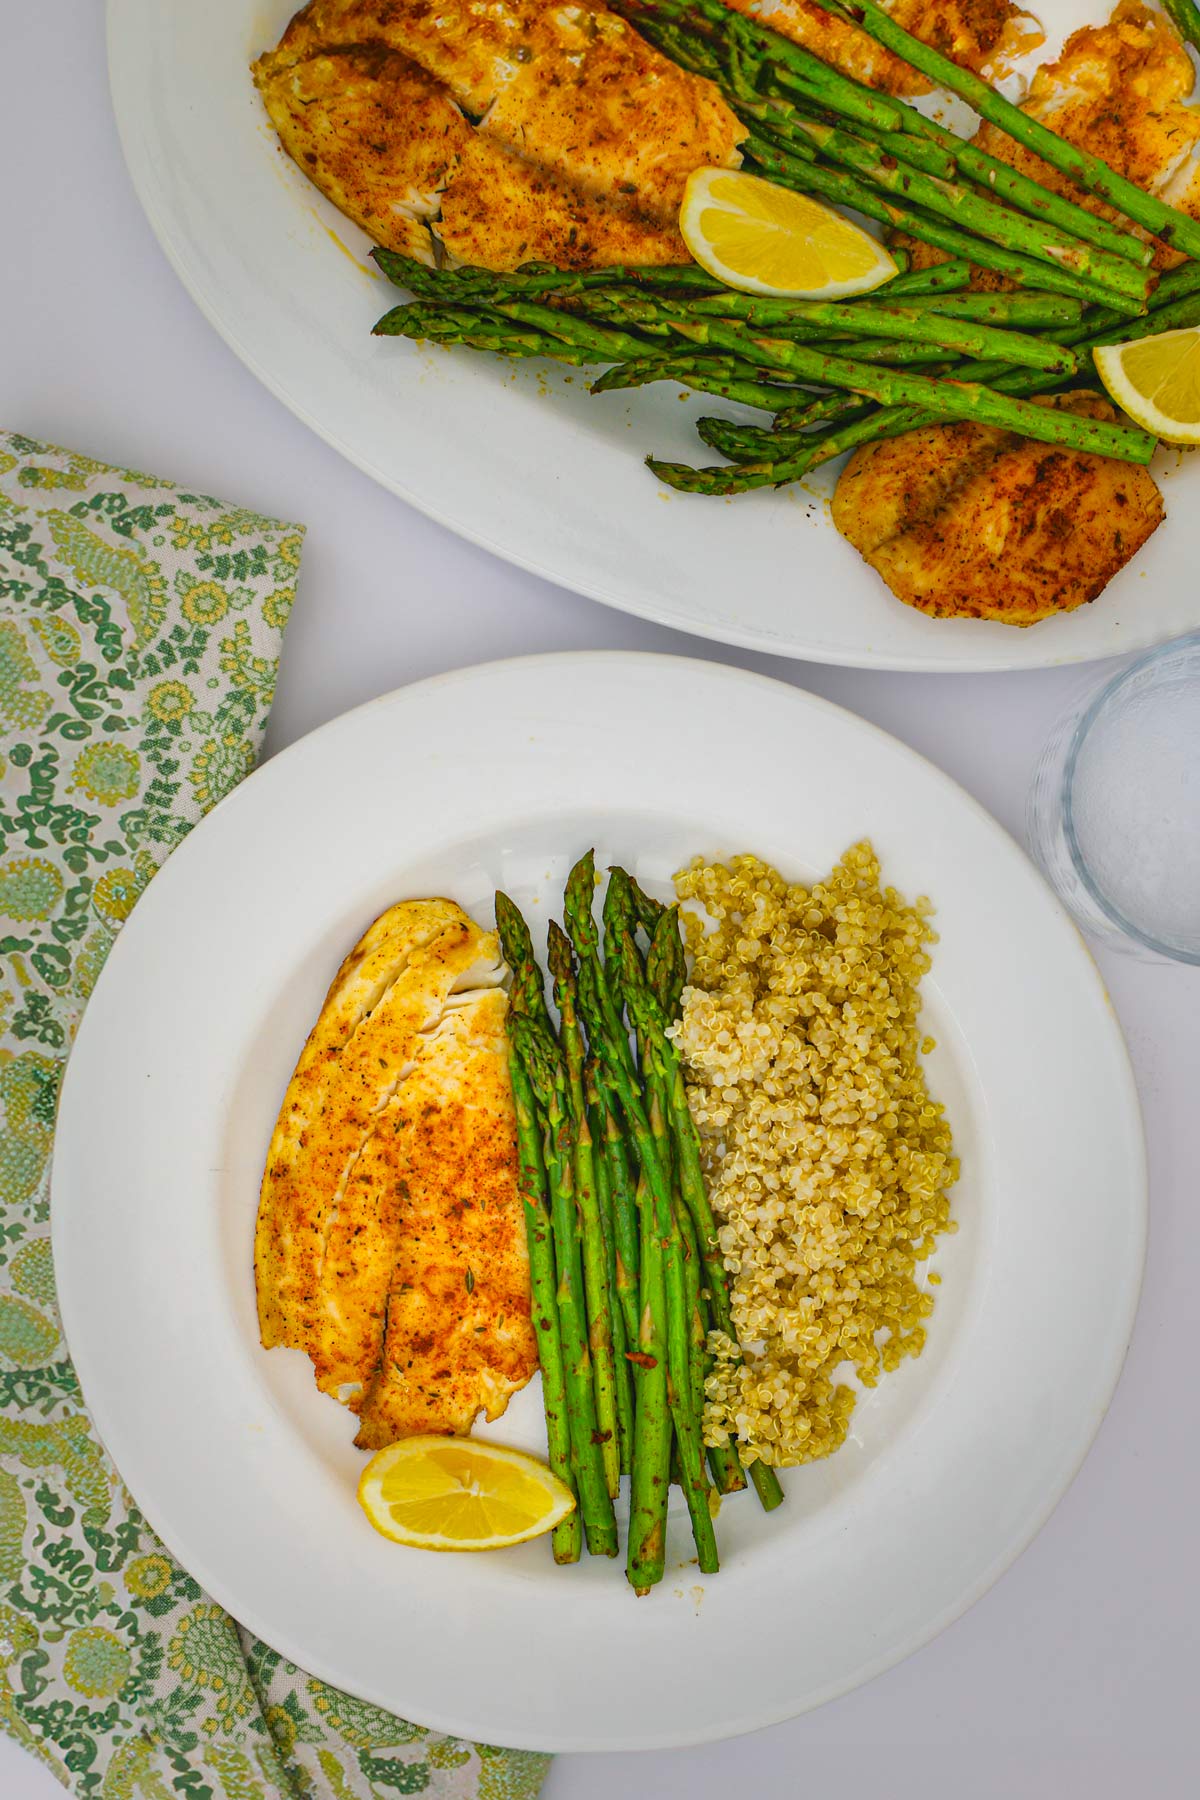 dinner table with platter of fish and a dinner plate filled with fish, asparagus, and quinoa.